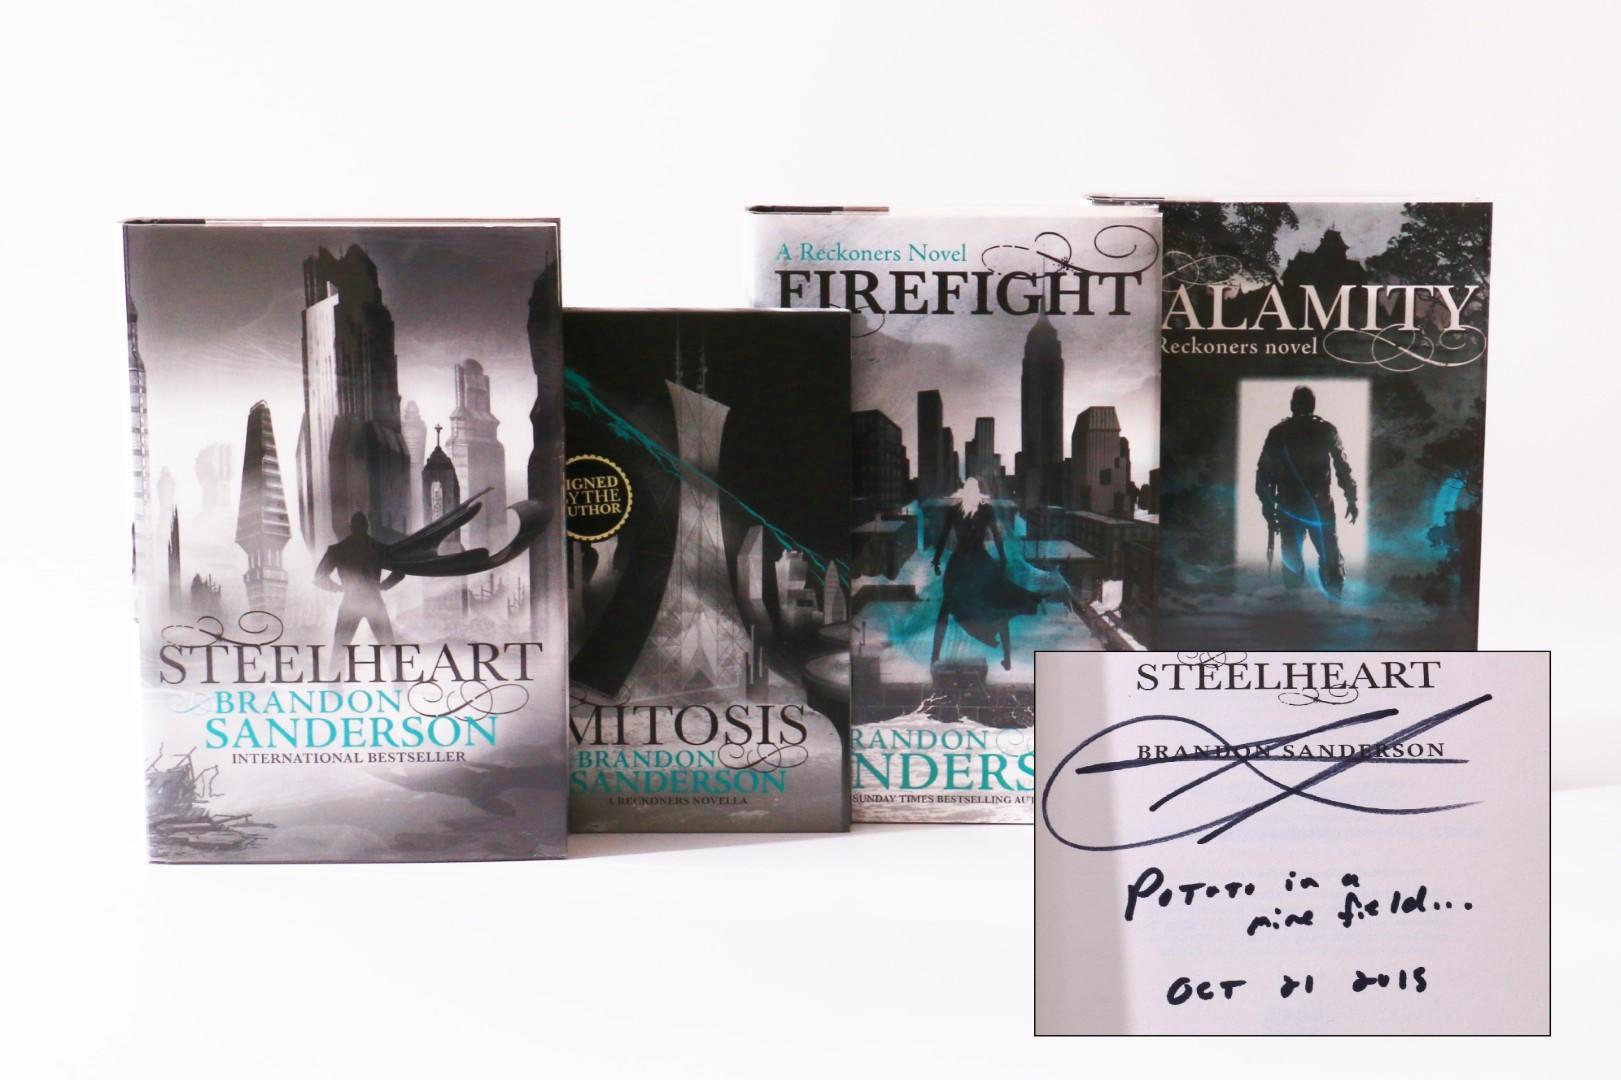 Brandon Sanderson - The Reckoners [comprising] Steelheart, Mitosis, Firefight and Calamity - Gollancz, 2013-2016, Signed Limited Edition.